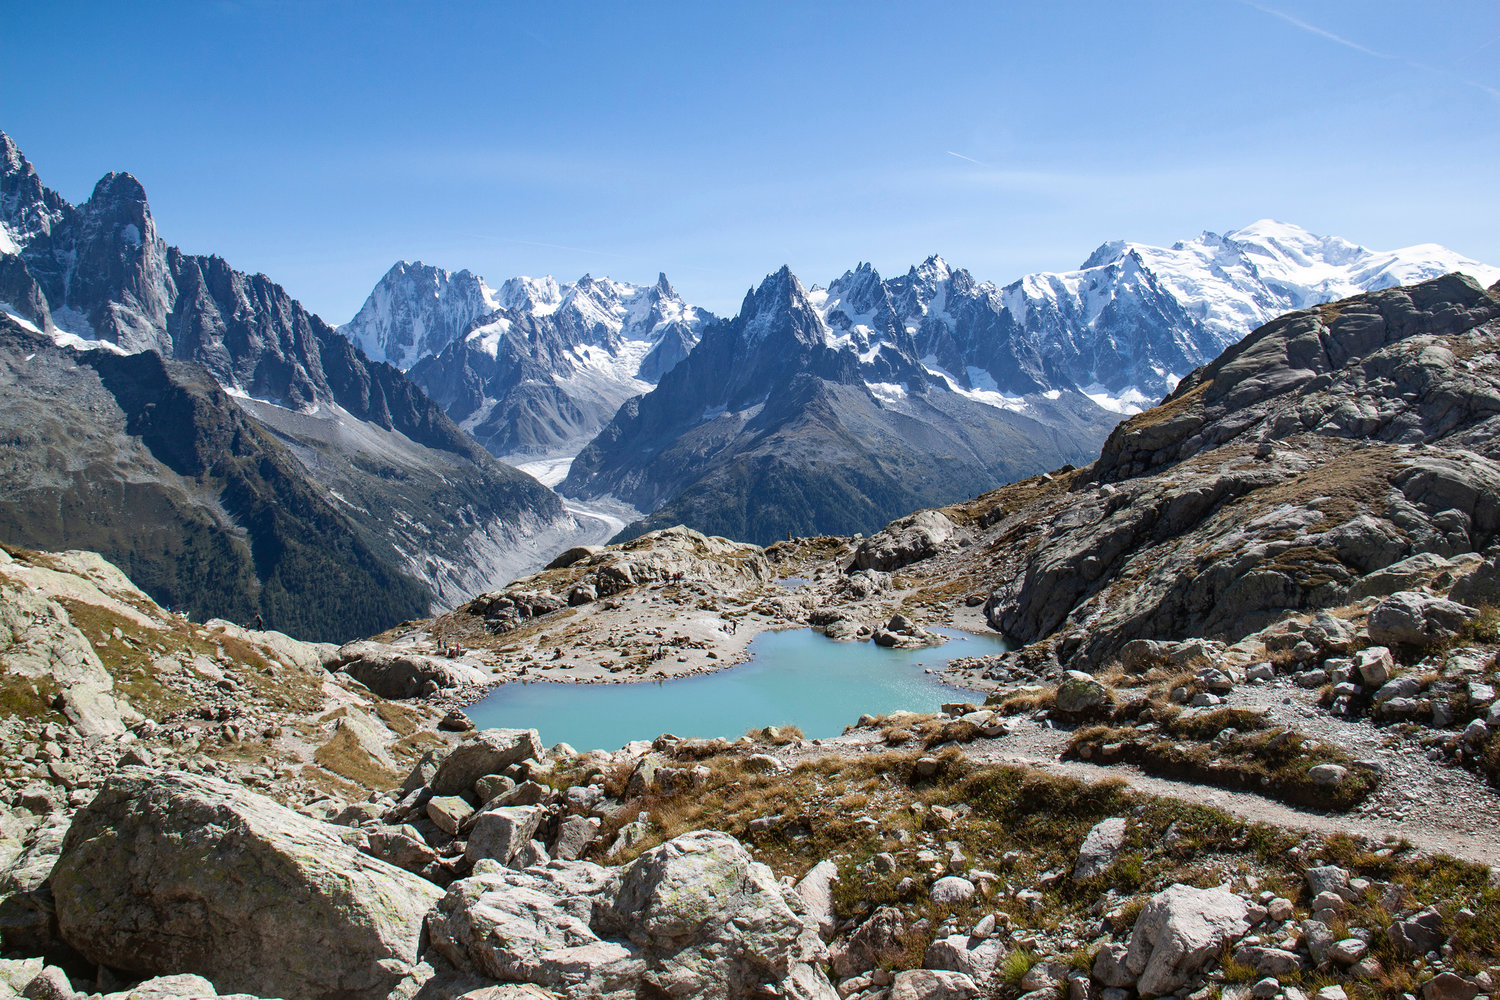 Hiking to Lac Blanc on the Tour du Mont Blanc — The Cat & The